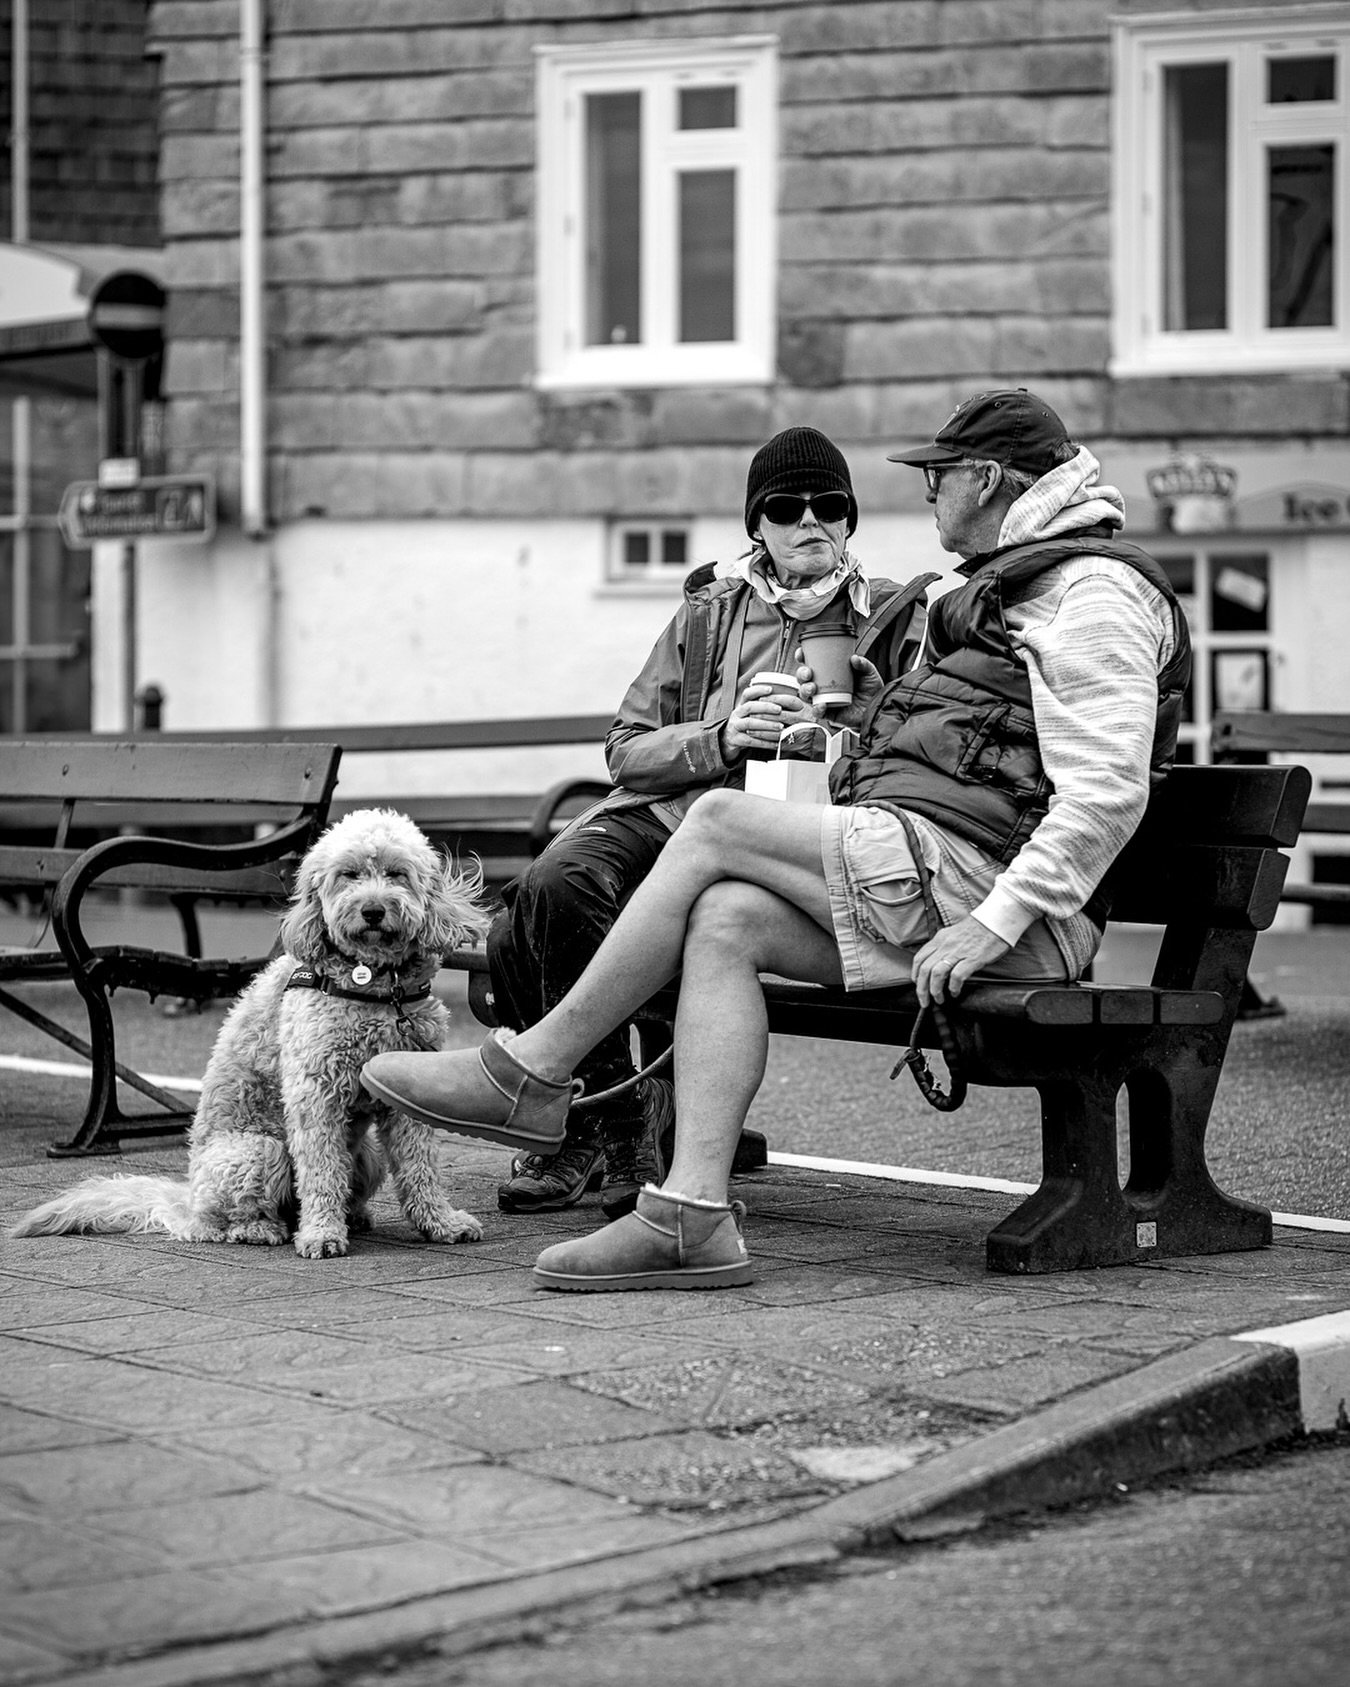 I&rsquo;ll wait &hellip;

Mar 2024 | Padstow, England
Leica M11-P | Summicron-M 75 f/2
&copy; 2024 Simon R. Cole

#Leica #LeicaM #LeicaUK #LeicaPhotography #ShotWideOpen #BnW #BnWPhoto #BnWPhotography
#CityBnW #Masters_in_BnW #Incredible_BnW #BnW_Zon